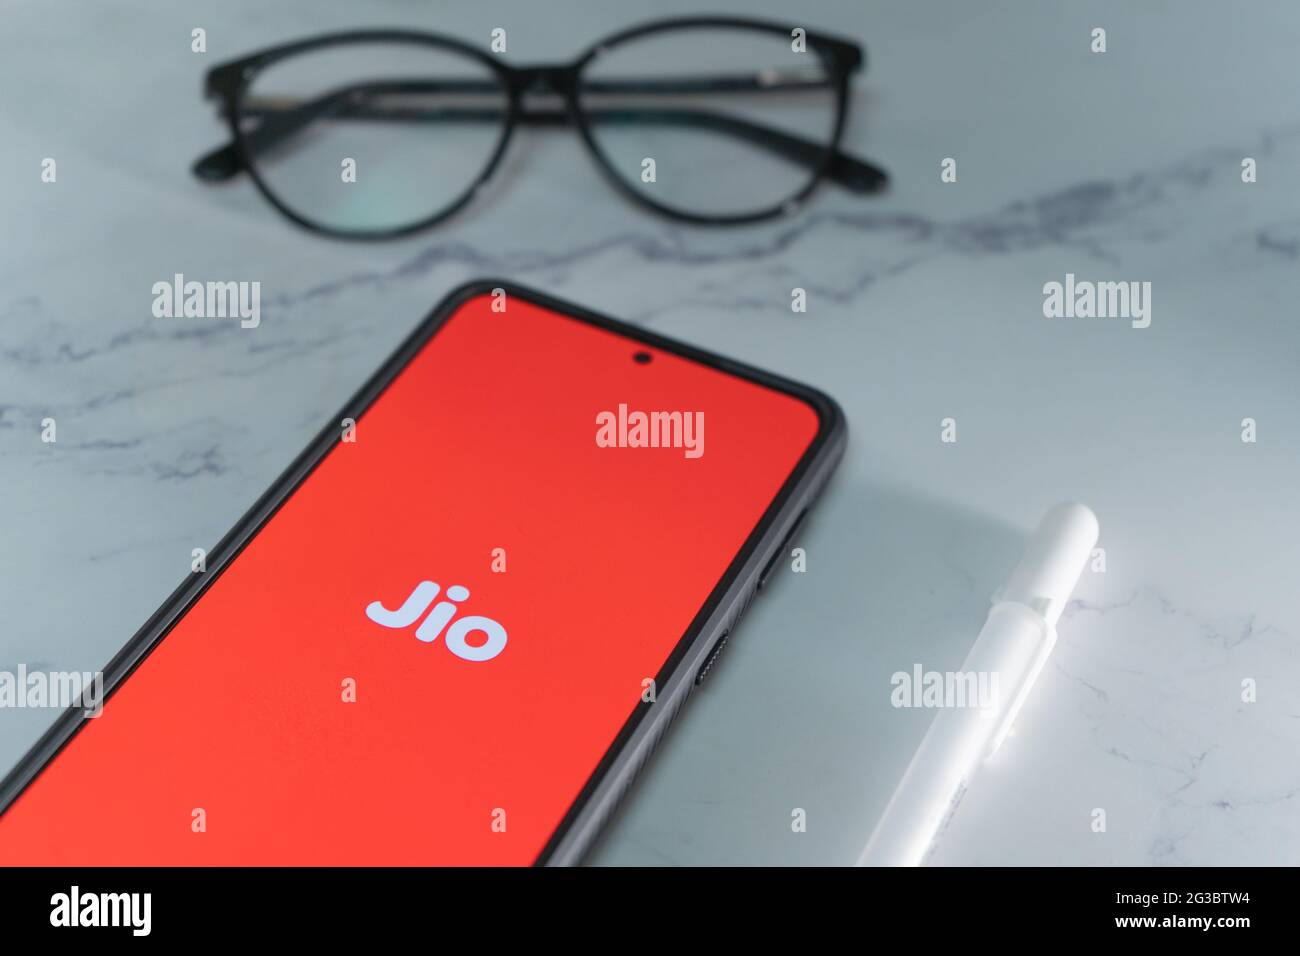 mobile phone with reliance jio logo in red showing india's largest internet service provider ISP which has changed how data is used in the country and Stock Photo